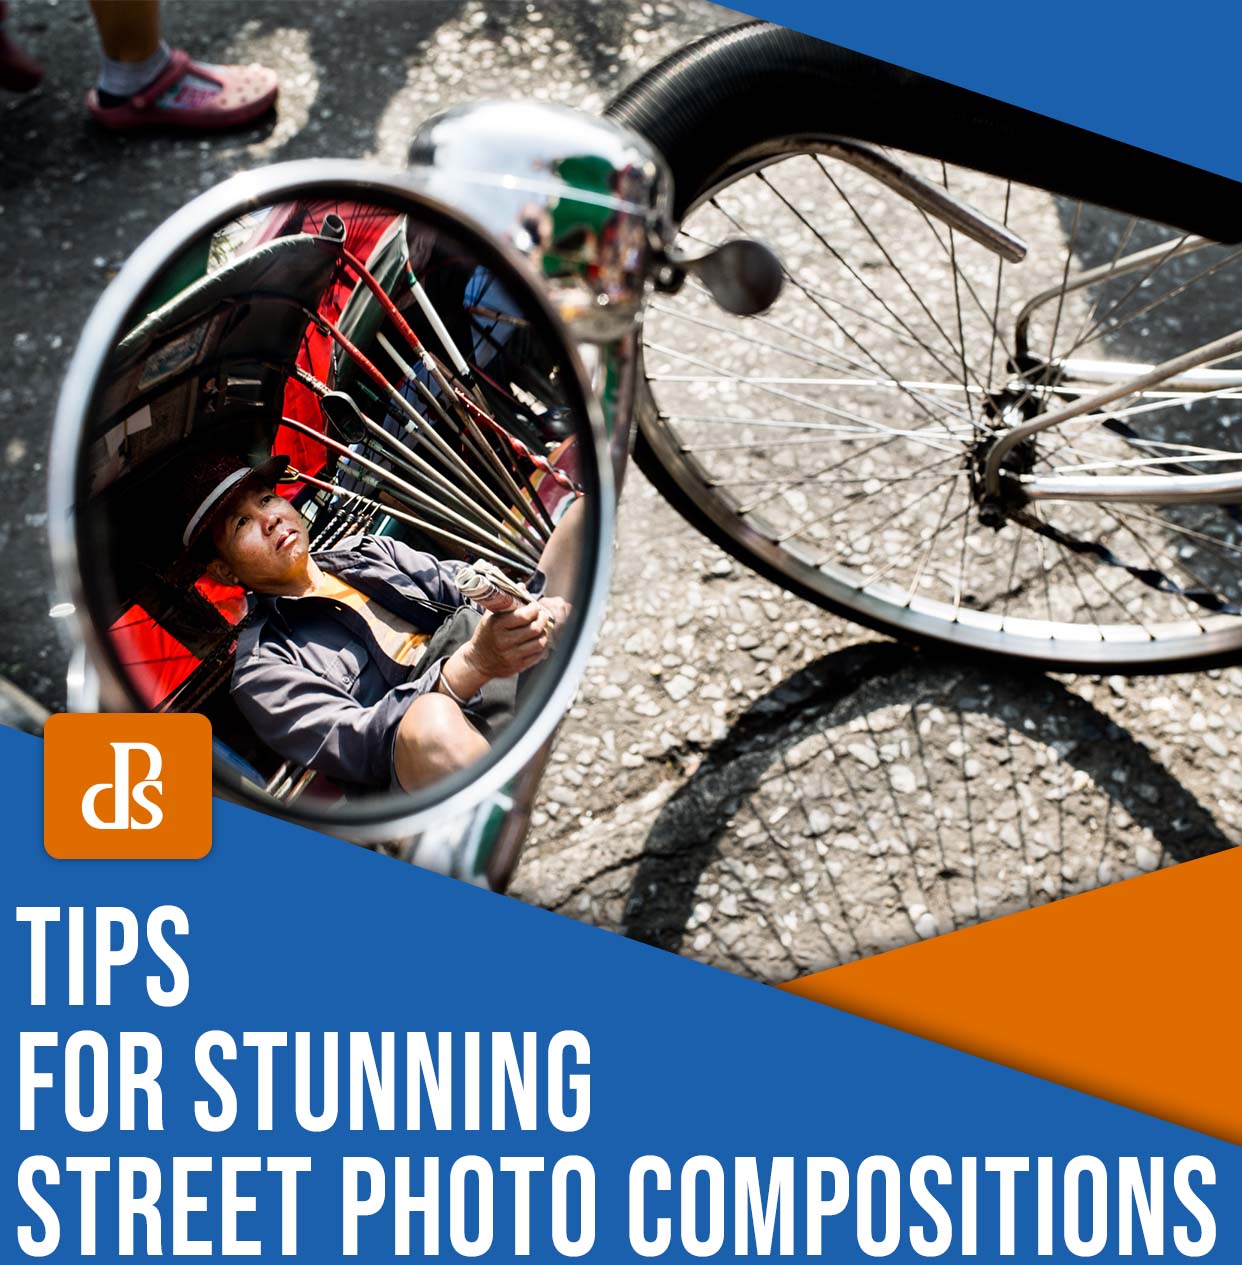 Tips for stunning street photography compositions